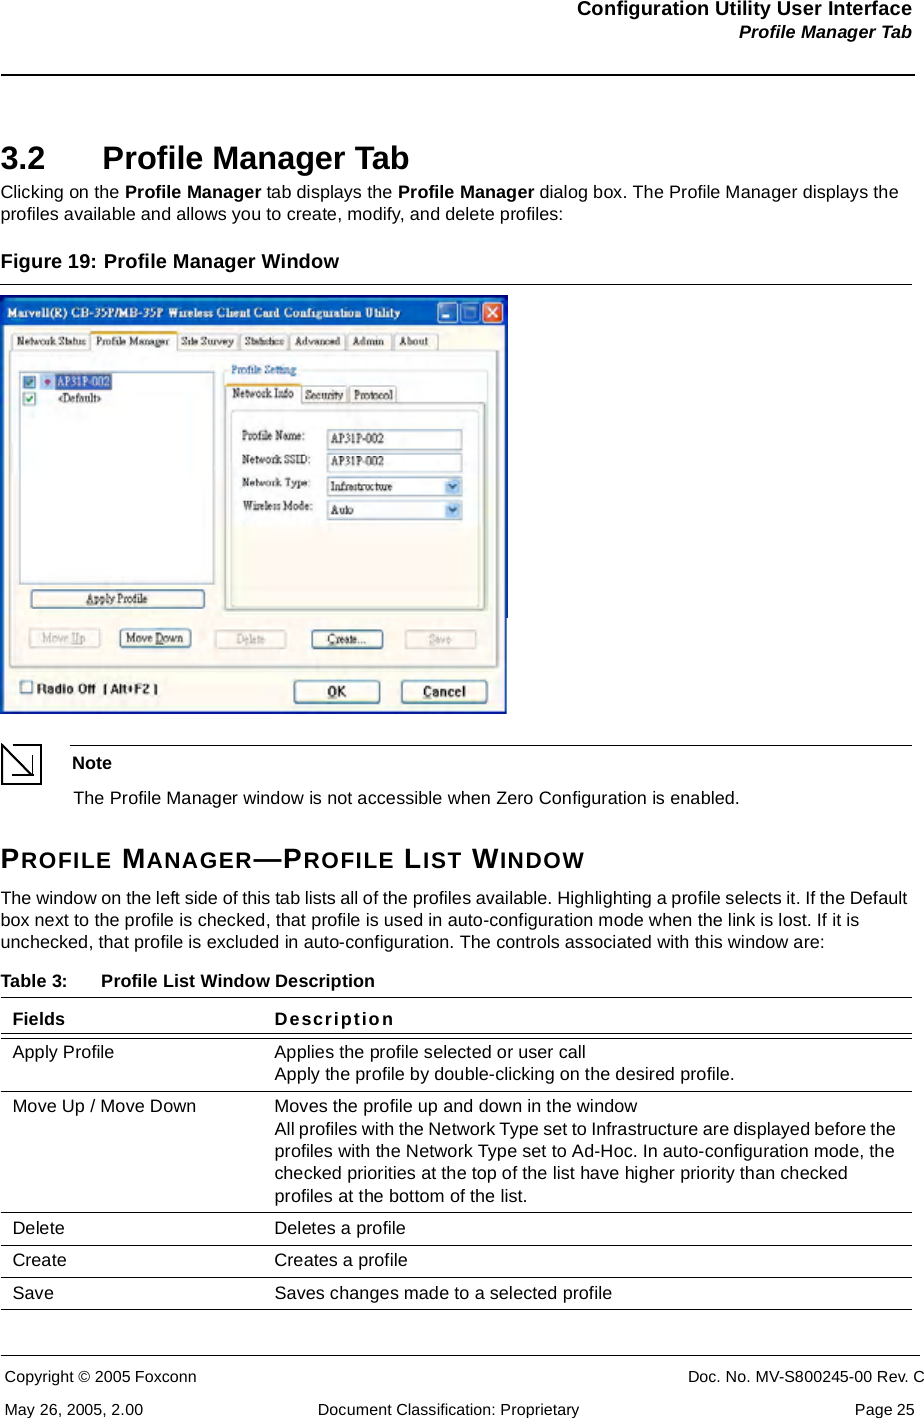 Configuration Utility User InterfaceProfile Manager TabCopyright © 2005 Foxconn CONFIDENTIAL Doc. No. MV-S800245-00 Rev. CMay 26, 2005, 2.00 Document Classification: Proprietary  Page 253.2 Profile Manager TabClicking on the Profile Manager tab displays the Profile Manager dialog box. The Profile Manager displays the profiles available and allows you to create, modify, and delete profiles:Figure 19: Profile Manager Window NoteThe Profile Manager window is not accessible when Zero Configuration is enabled.PROFILE MANAGER—PROFILE LIST WINDOWThe window on the left side of this tab lists all of the profiles available. Highlighting a profile selects it. If the Default box next to the profile is checked, that profile is used in auto-configuration mode when the link is lost. If it is unchecked, that profile is excluded in auto-configuration. The controls associated with this window are: Table 3: Profile List Window DescriptionFields DescriptionApply Profile Applies the profile selected or user call Apply the profile by double-clicking on the desired profile.Move Up / Move Down Moves the profile up and down in the window All profiles with the Network Type set to Infrastructure are displayed before the profiles with the Network Type set to Ad-Hoc. In auto-configuration mode, the checked priorities at the top of the list have higher priority than checked profiles at the bottom of the list.Delete Deletes a profileCreate Creates a profileSave Saves changes made to a selected profile